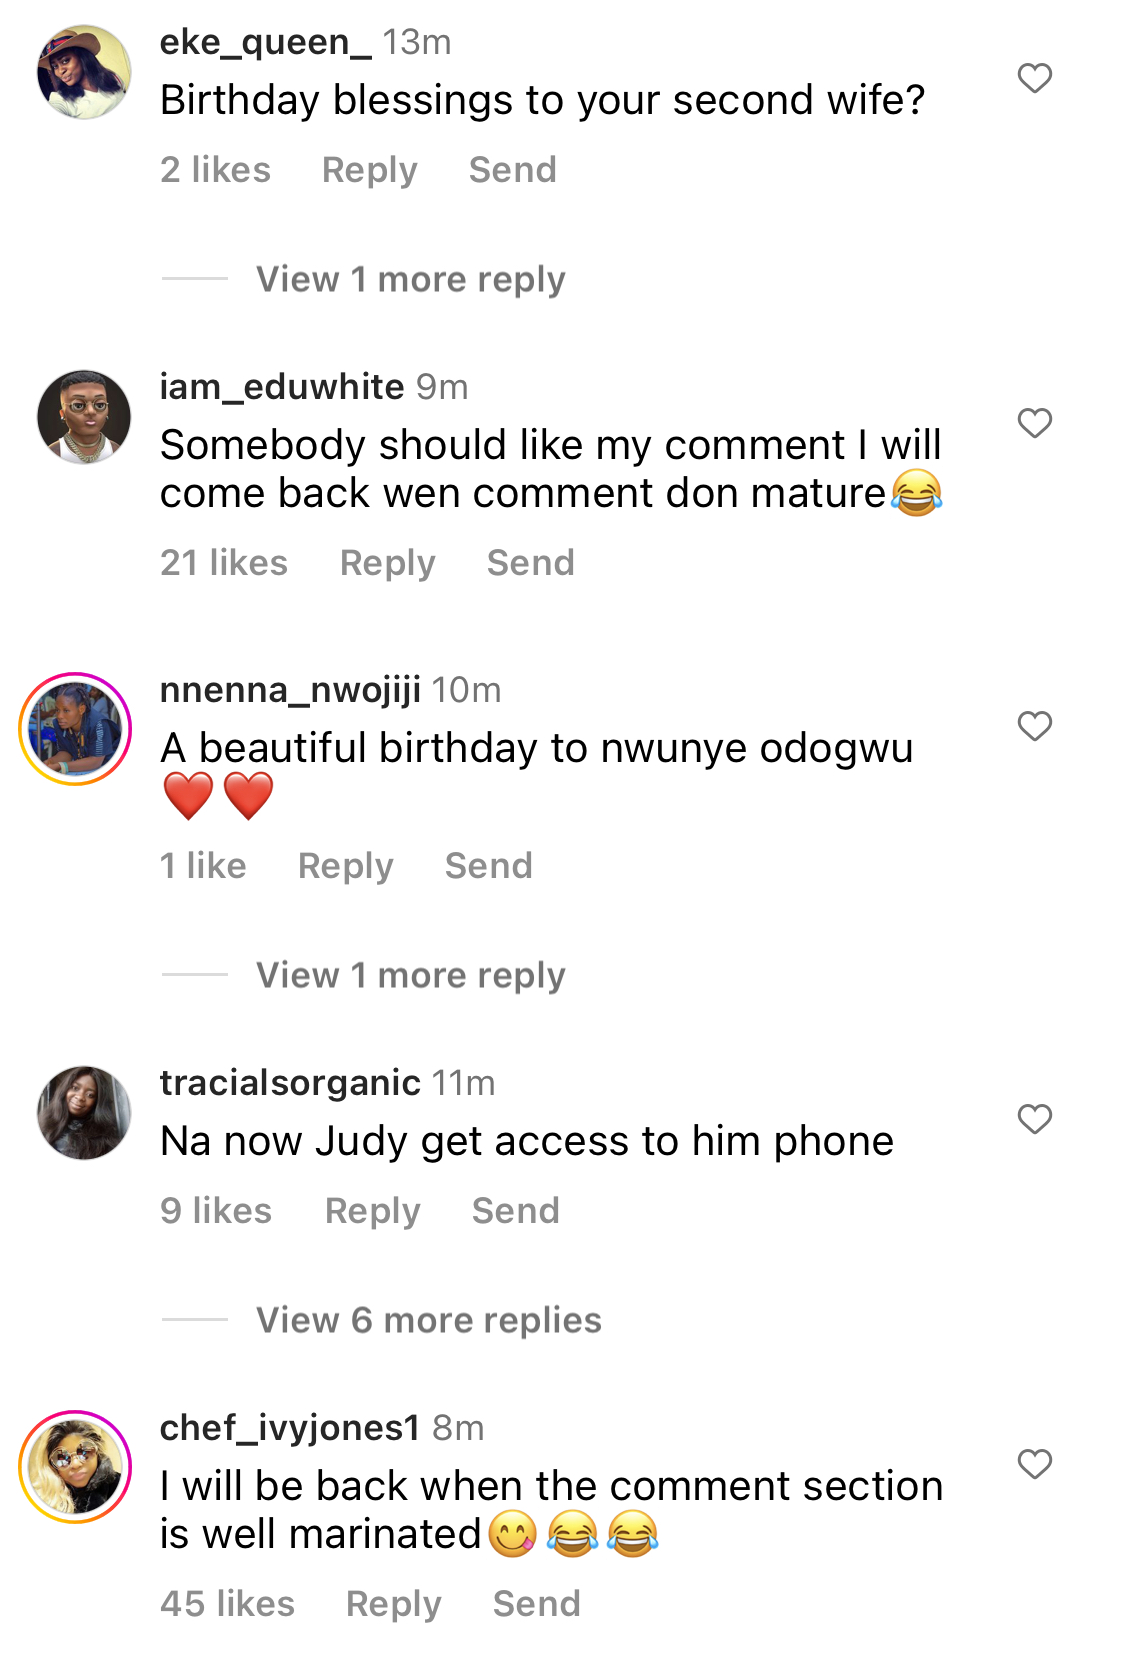 God’s special daughter - Actor Yul Edochie rains praises on second wife Judy Austin on her birthday [photos]